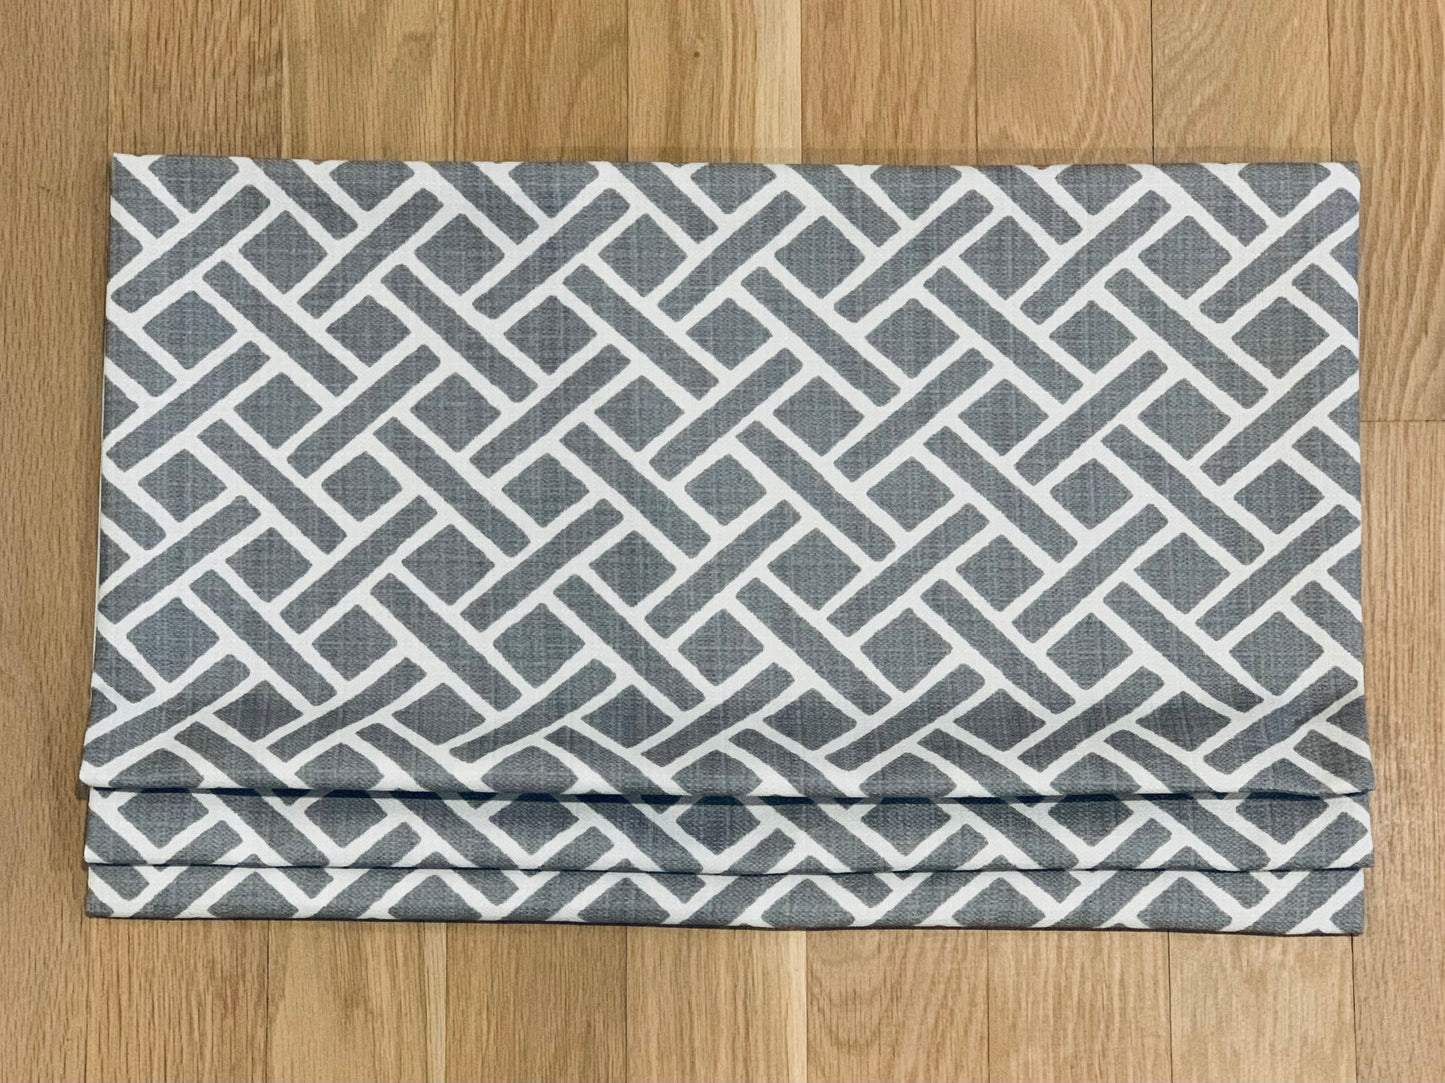 Faux Roman Shade Valance in Geometric Grey or Navy and White, Fully Lined, Custom Made, More Colors Available